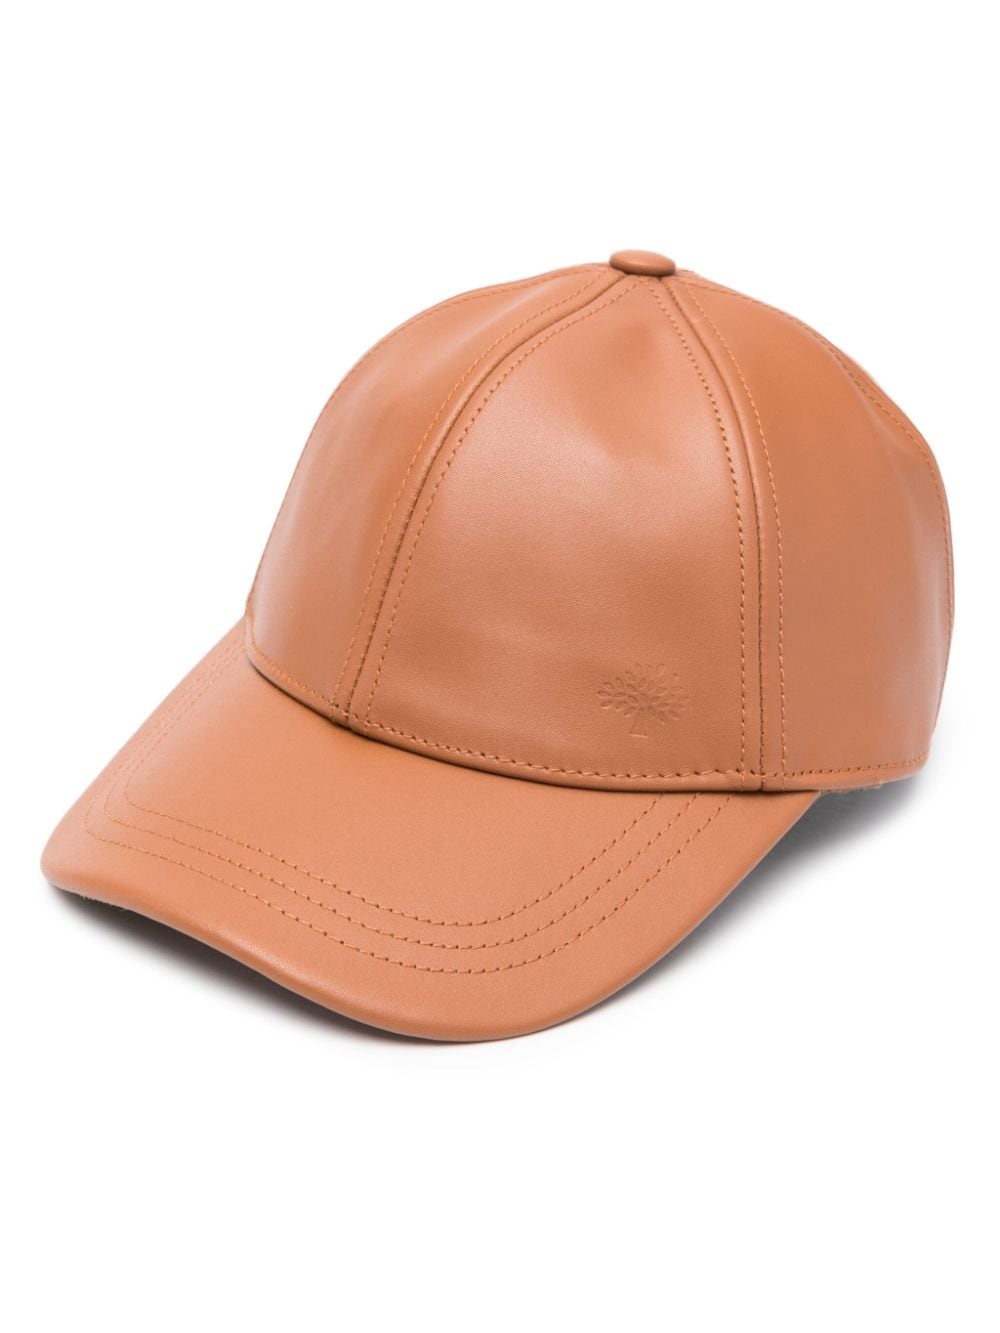 Mulberry leather baseball cap - Brown von Mulberry